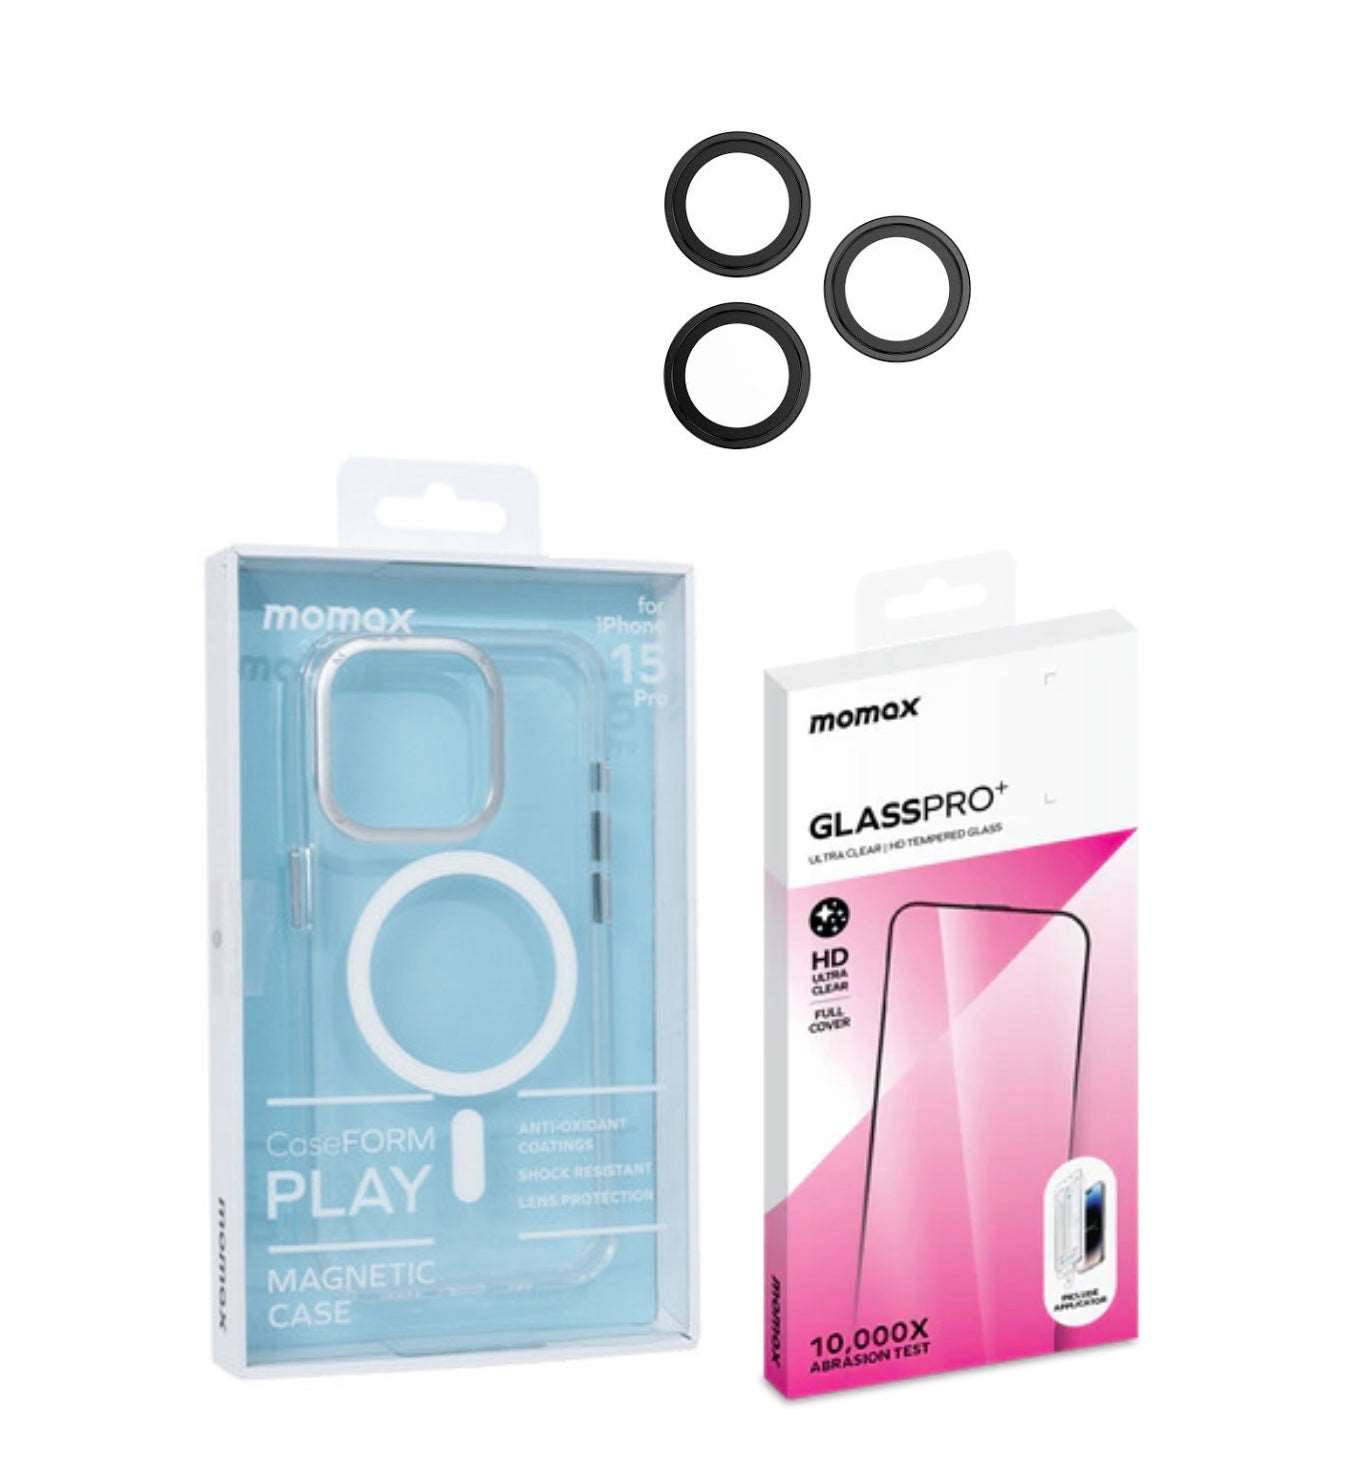 Momax Gift set iPhone 15 Pro Max ( Case - Screen protector - Camera lens ) - iGadget Store